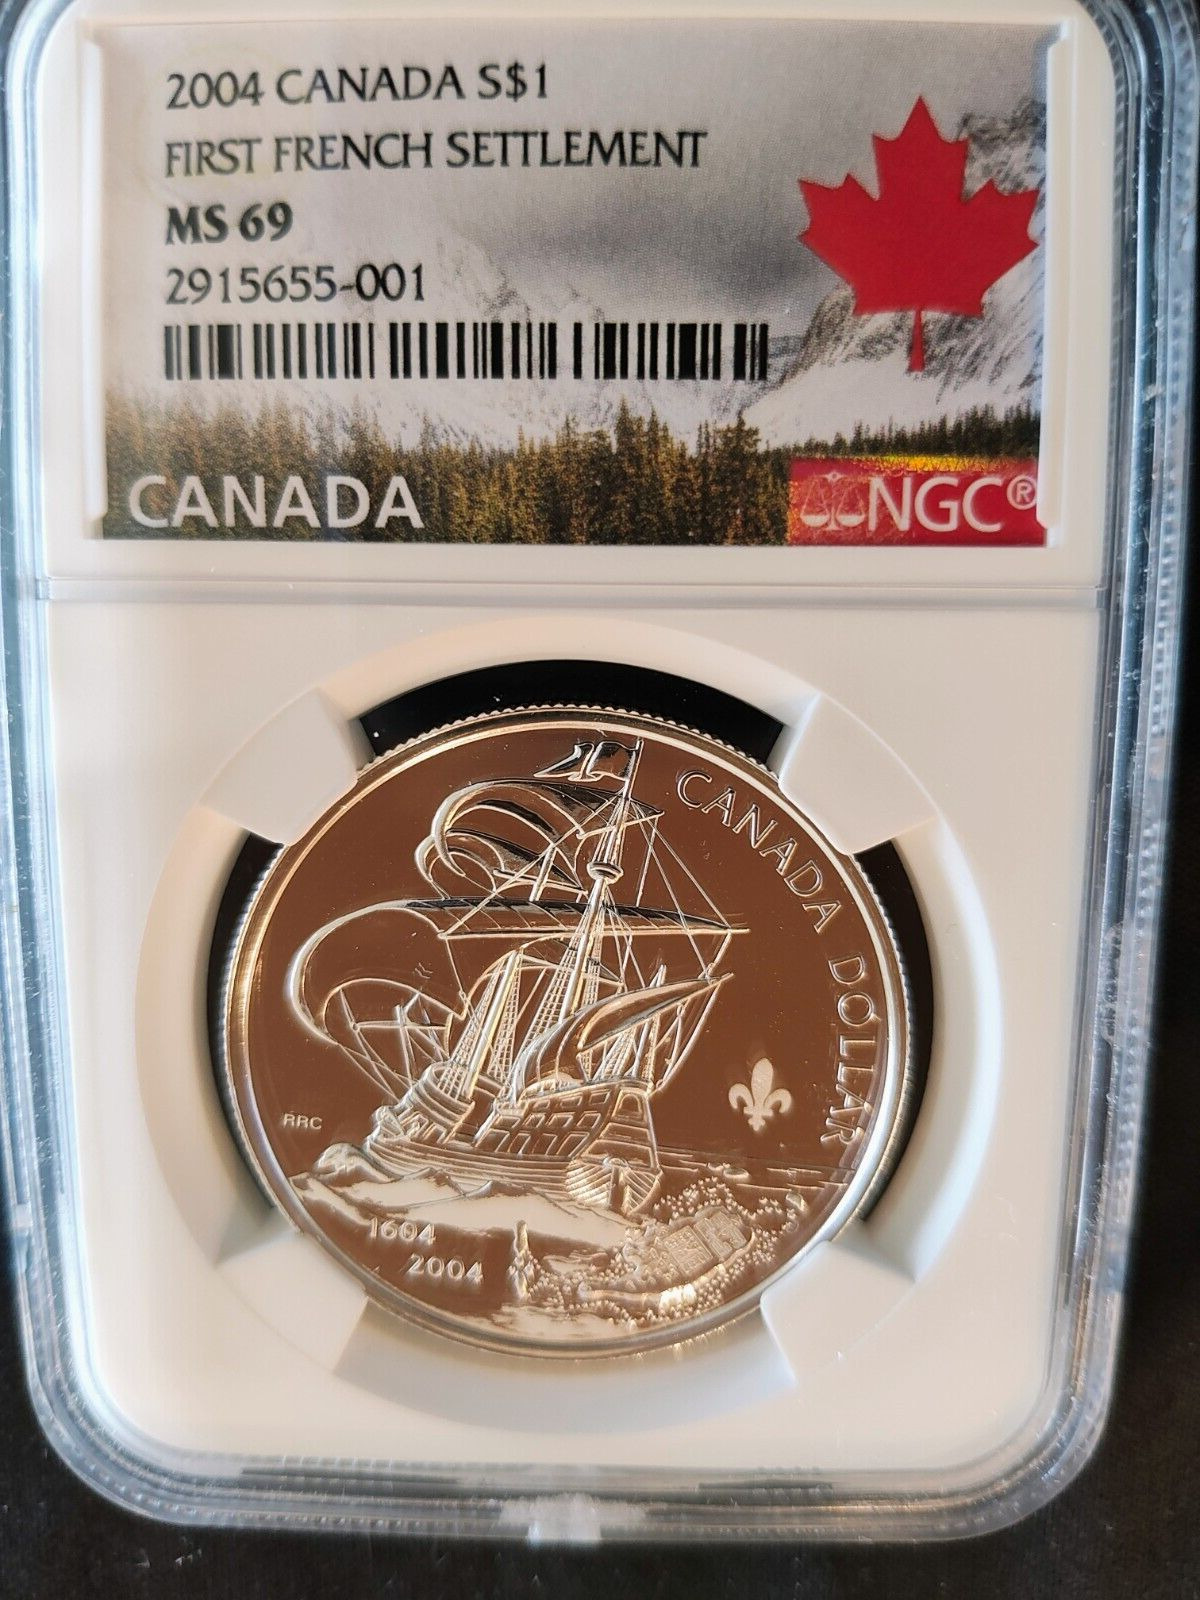 2004 Canada $1 First French Settlement Silver Dollar - NGC: MS 69